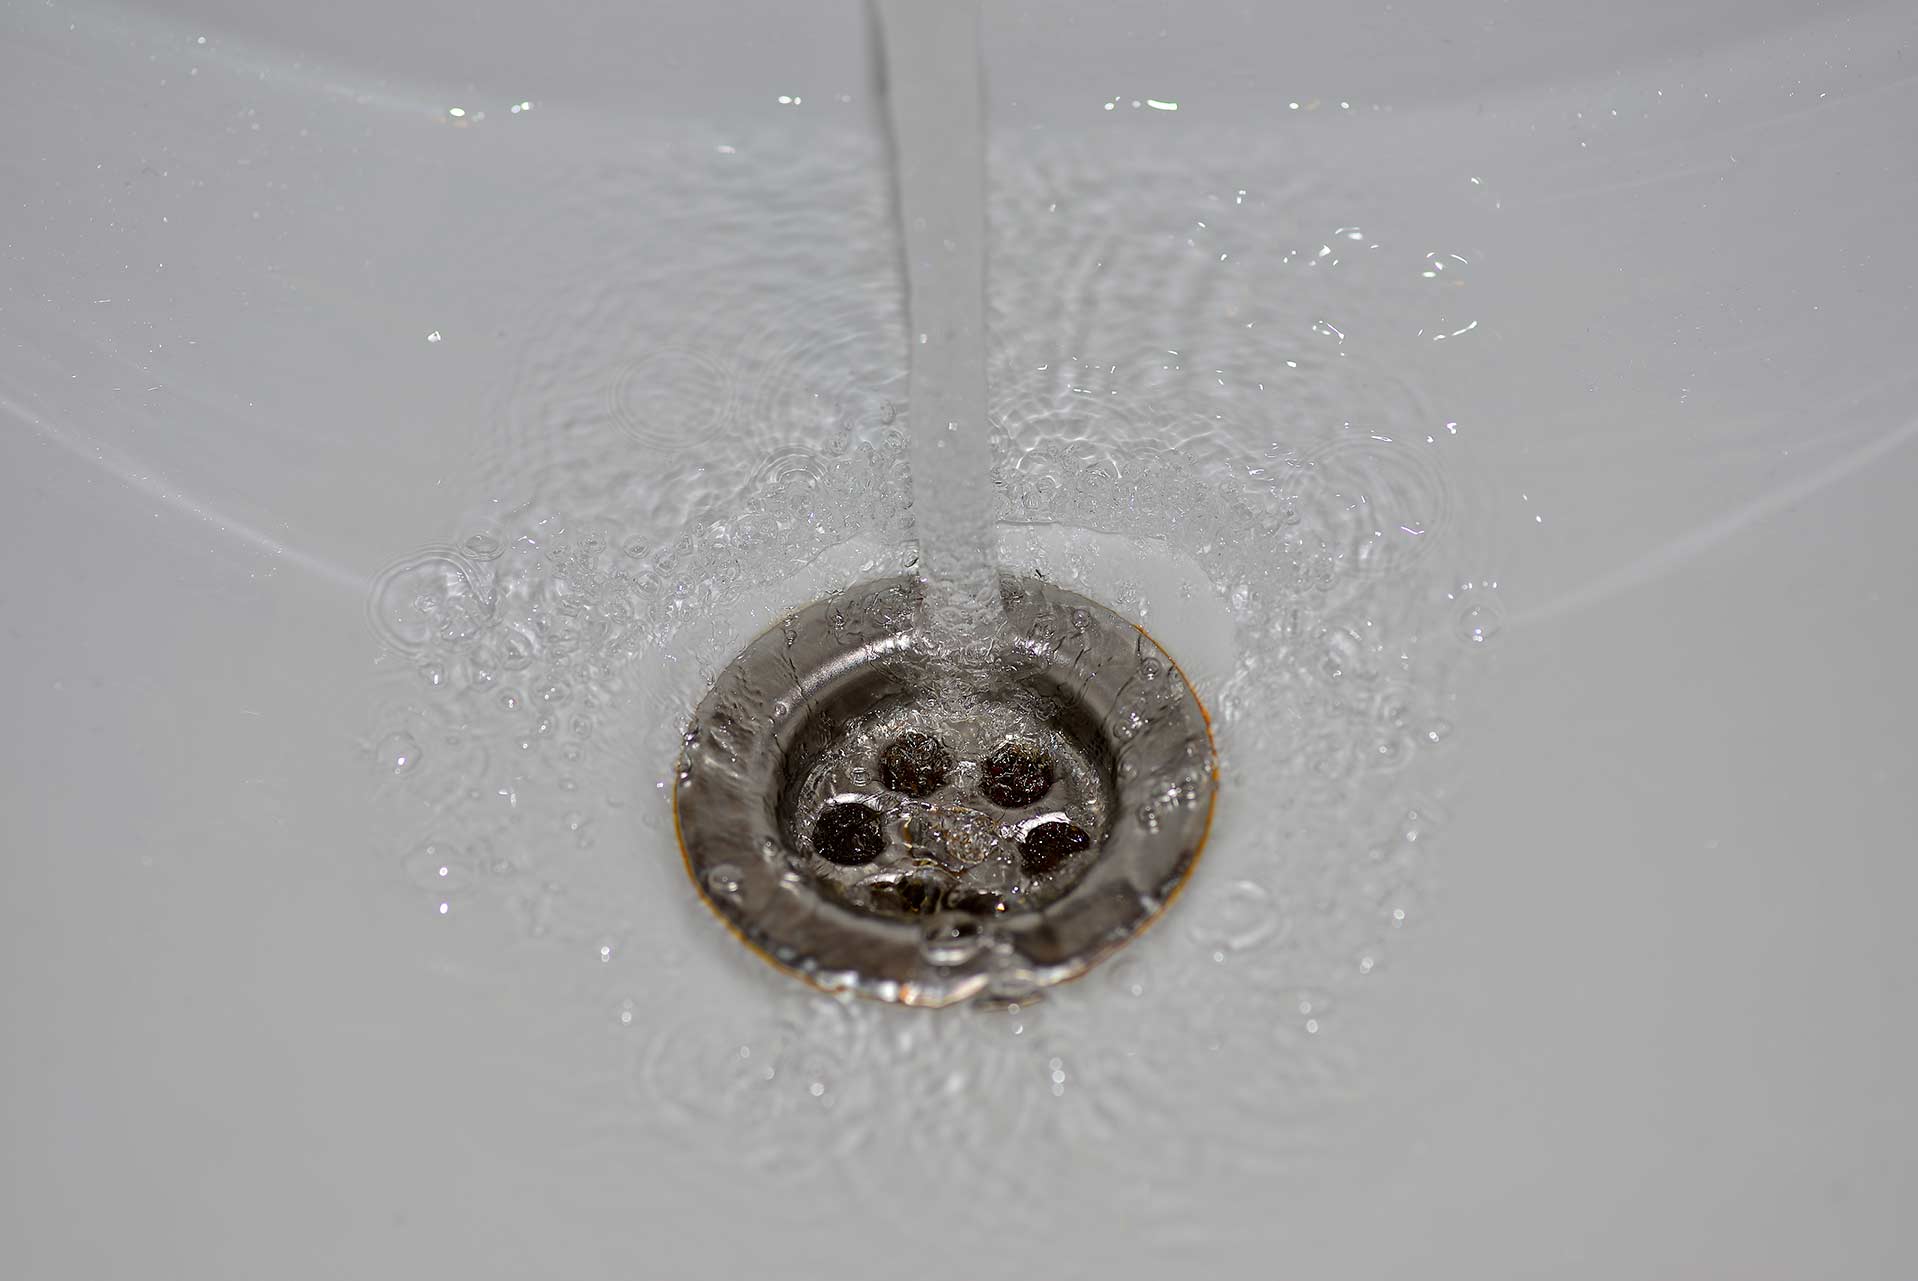 A2B Drains provides services to unblock blocked sinks and drains for properties in Royal Tunbridge Wells.